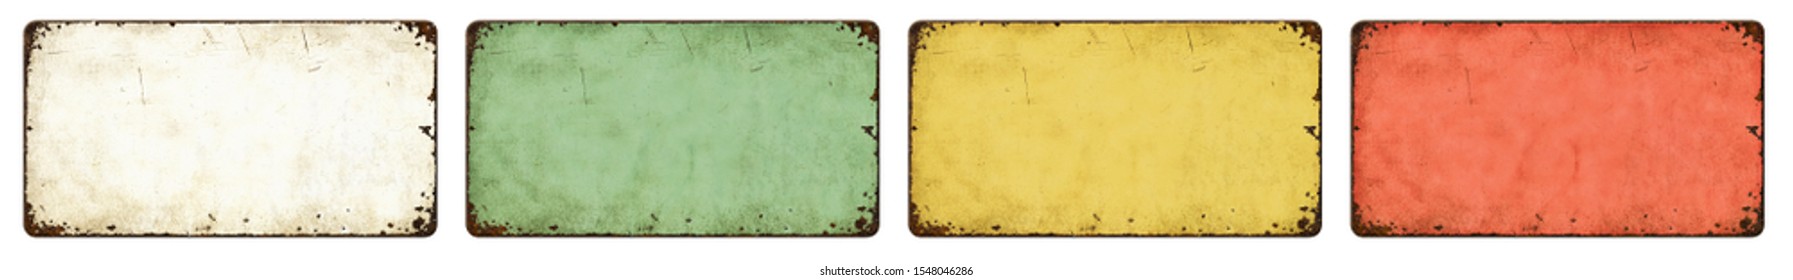 Four empty vintage tin signs on a white background - Shutterstock ID 1548046286